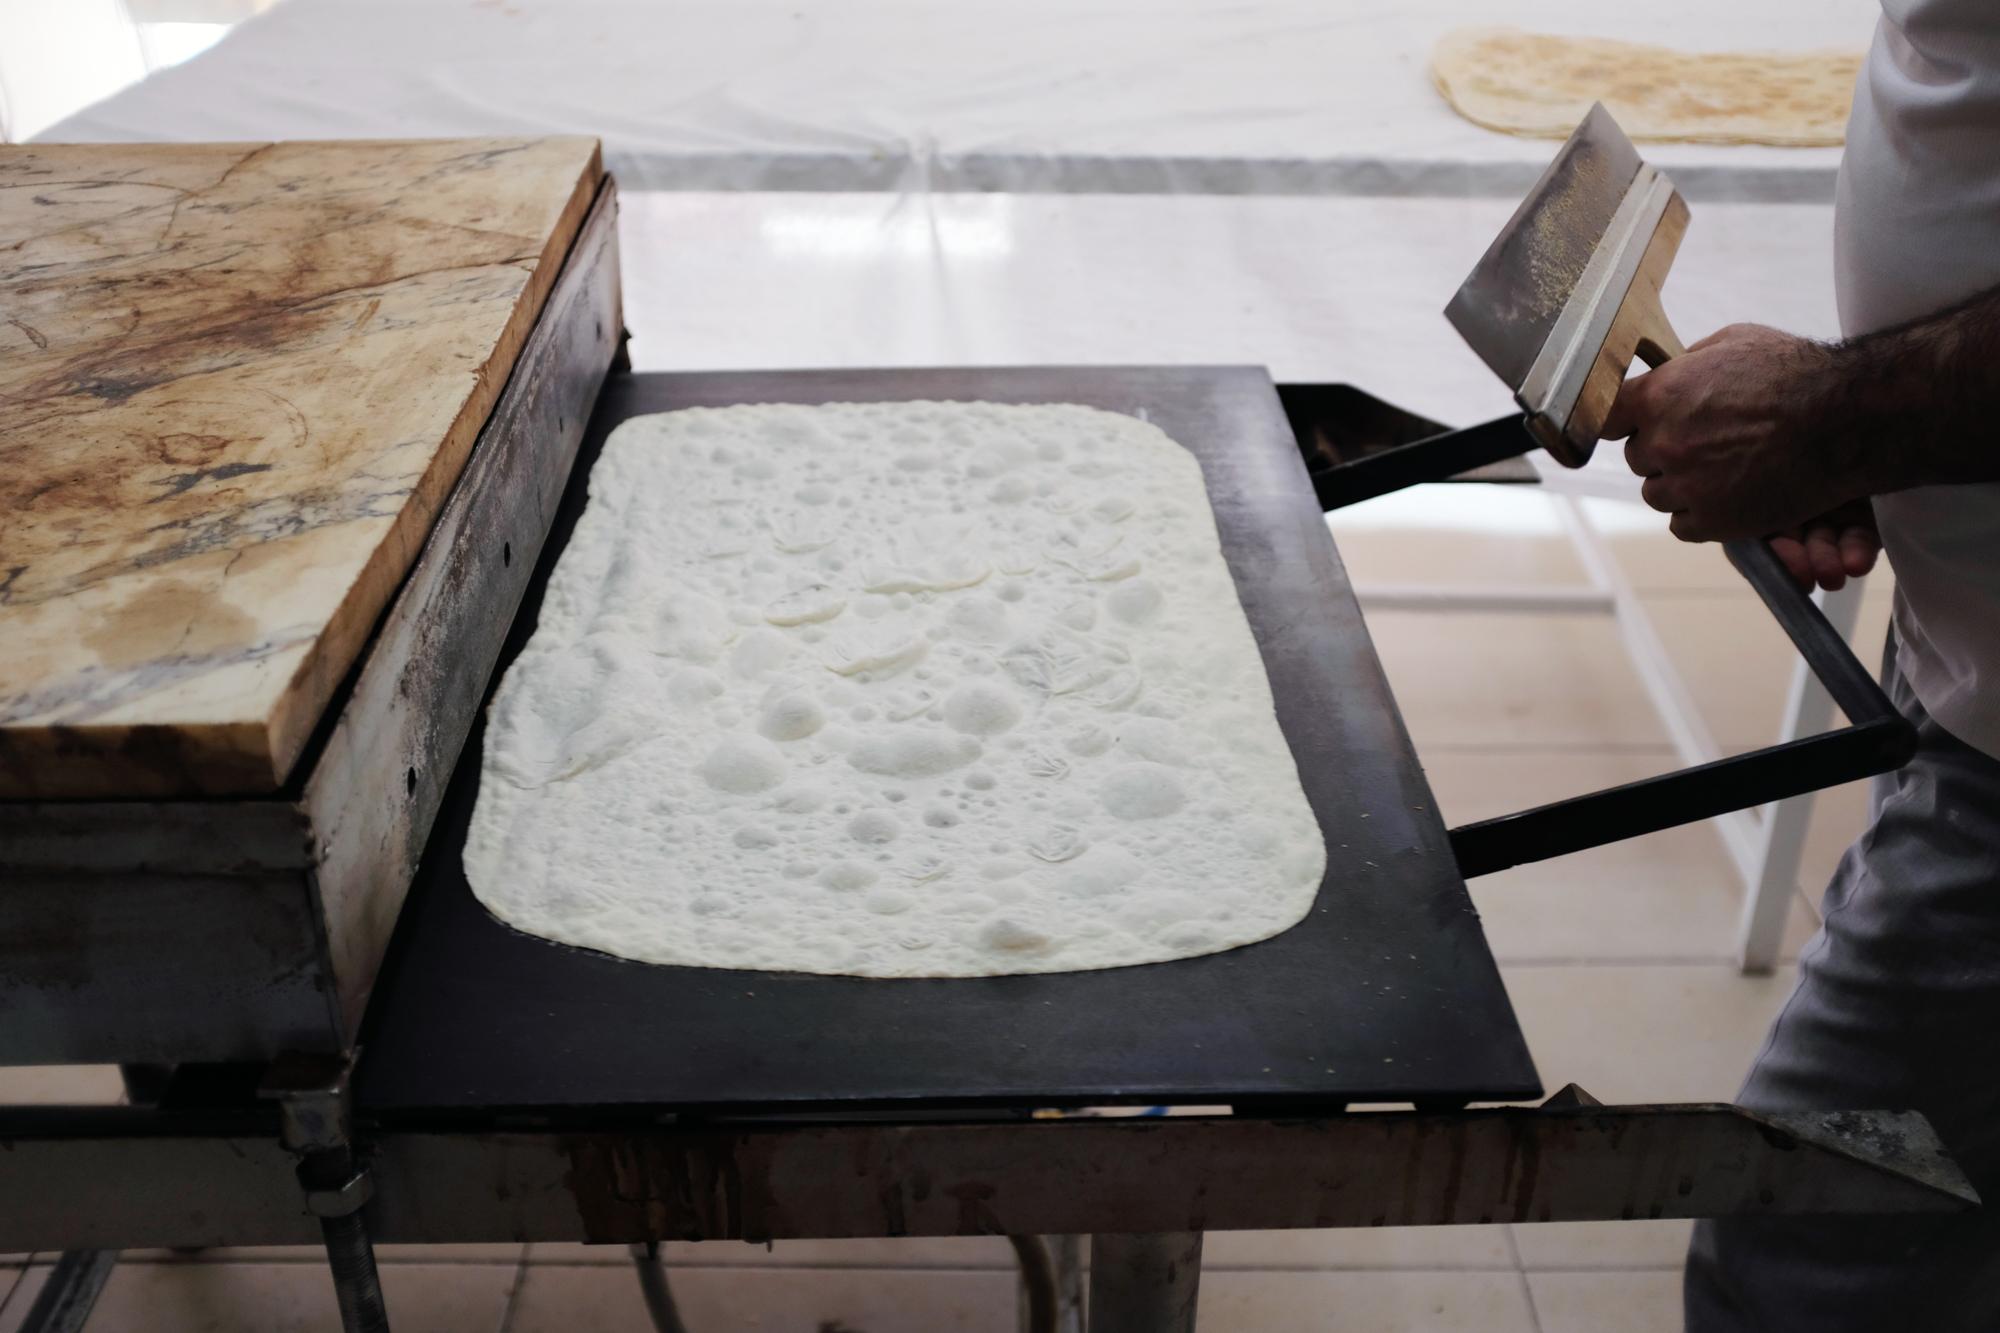 Lavash - Erhan built his oven himself with the help of an expert...